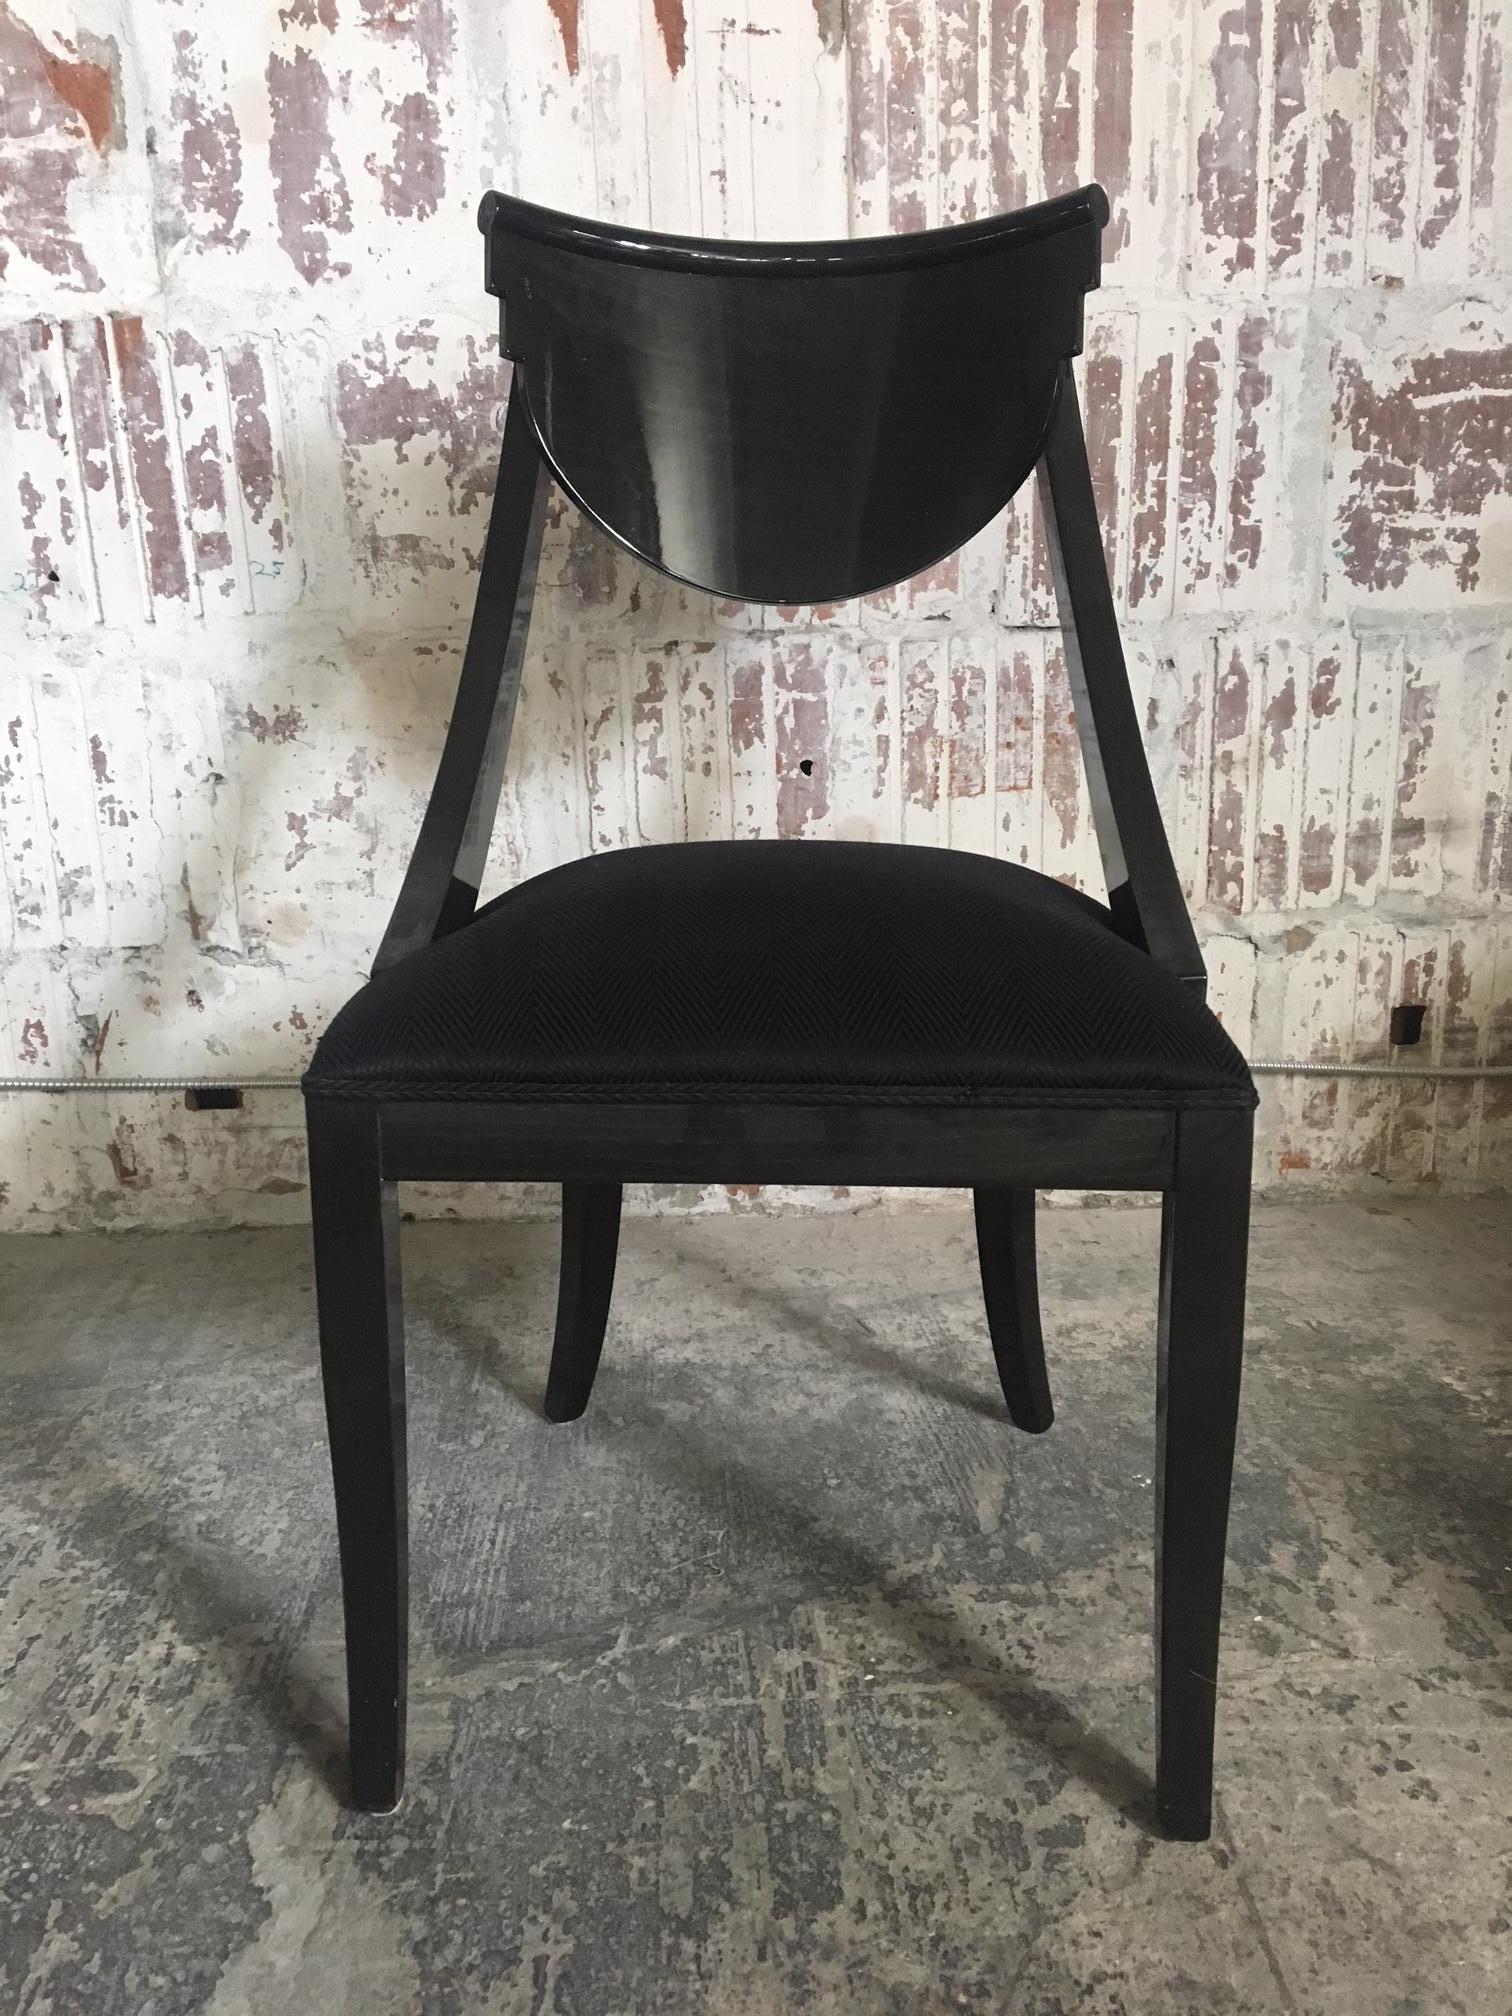 Set of six black lacquered dining chairs designed by Pietro Constantini for Ello Furniture. Circa 1970's. Finished in solid black lacquer. Very good vintage condition with minor signs of age appropriate wear.